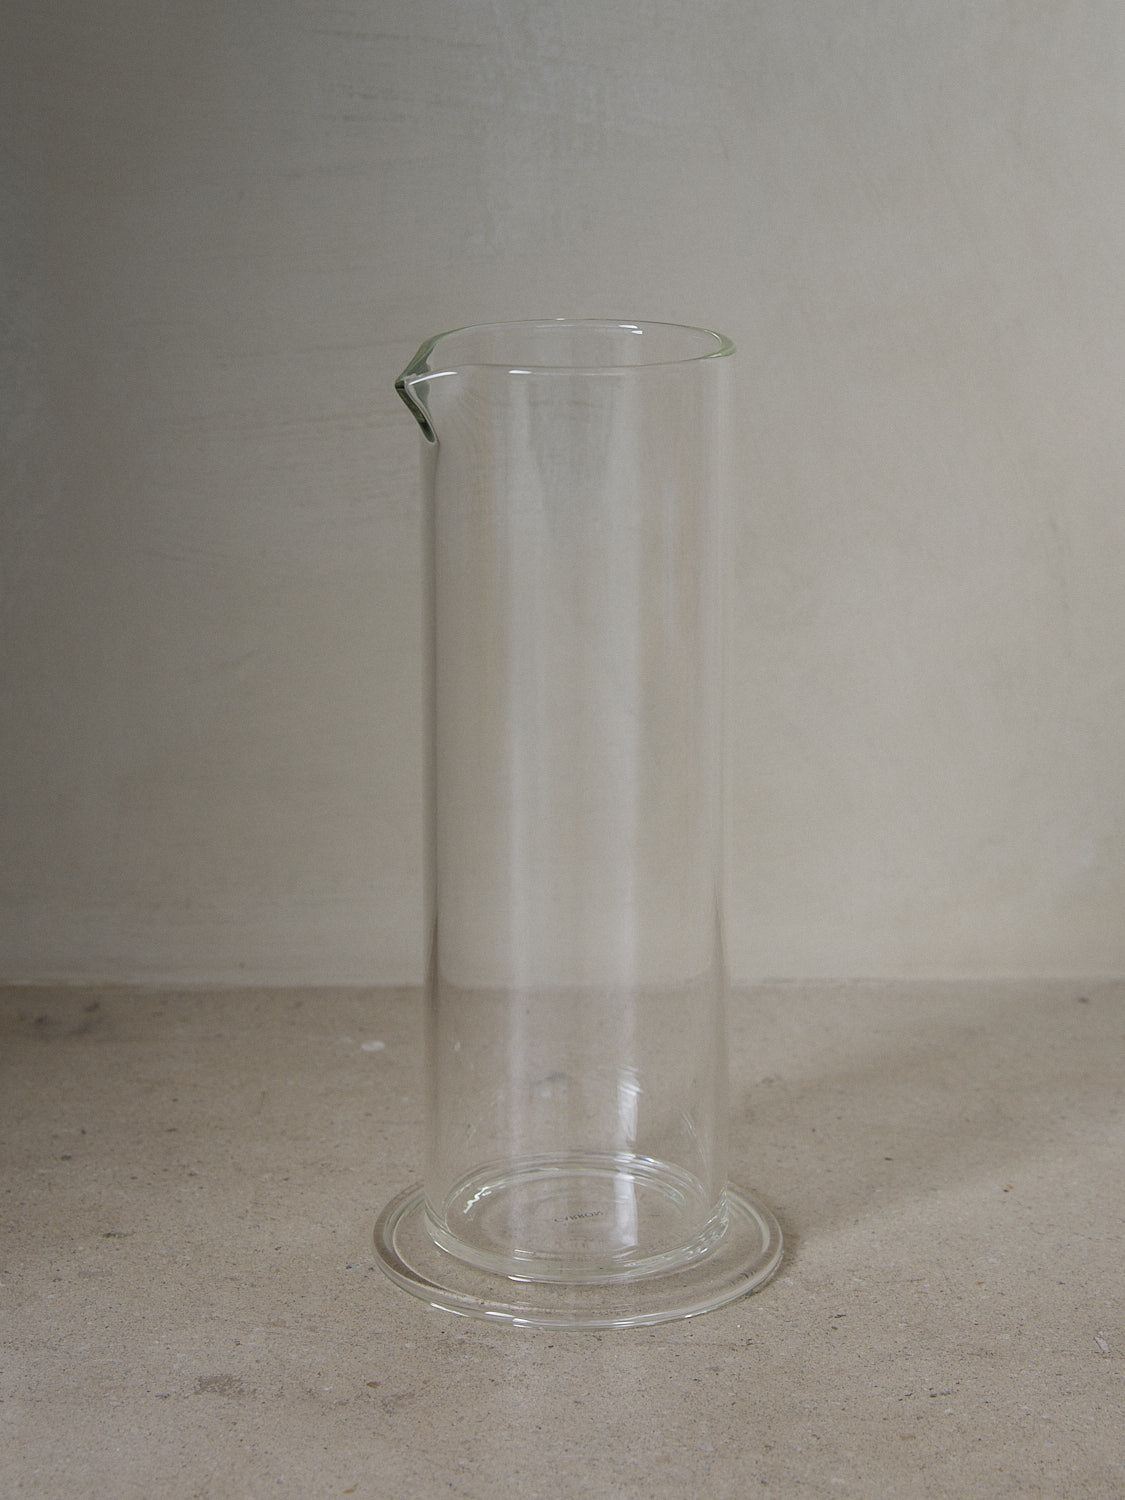 Paris Carafe. Casually elegant tall water carafe designed by Mathilde Carron-Astier de Villatte and individually mouth blown in borosilicate glass. 